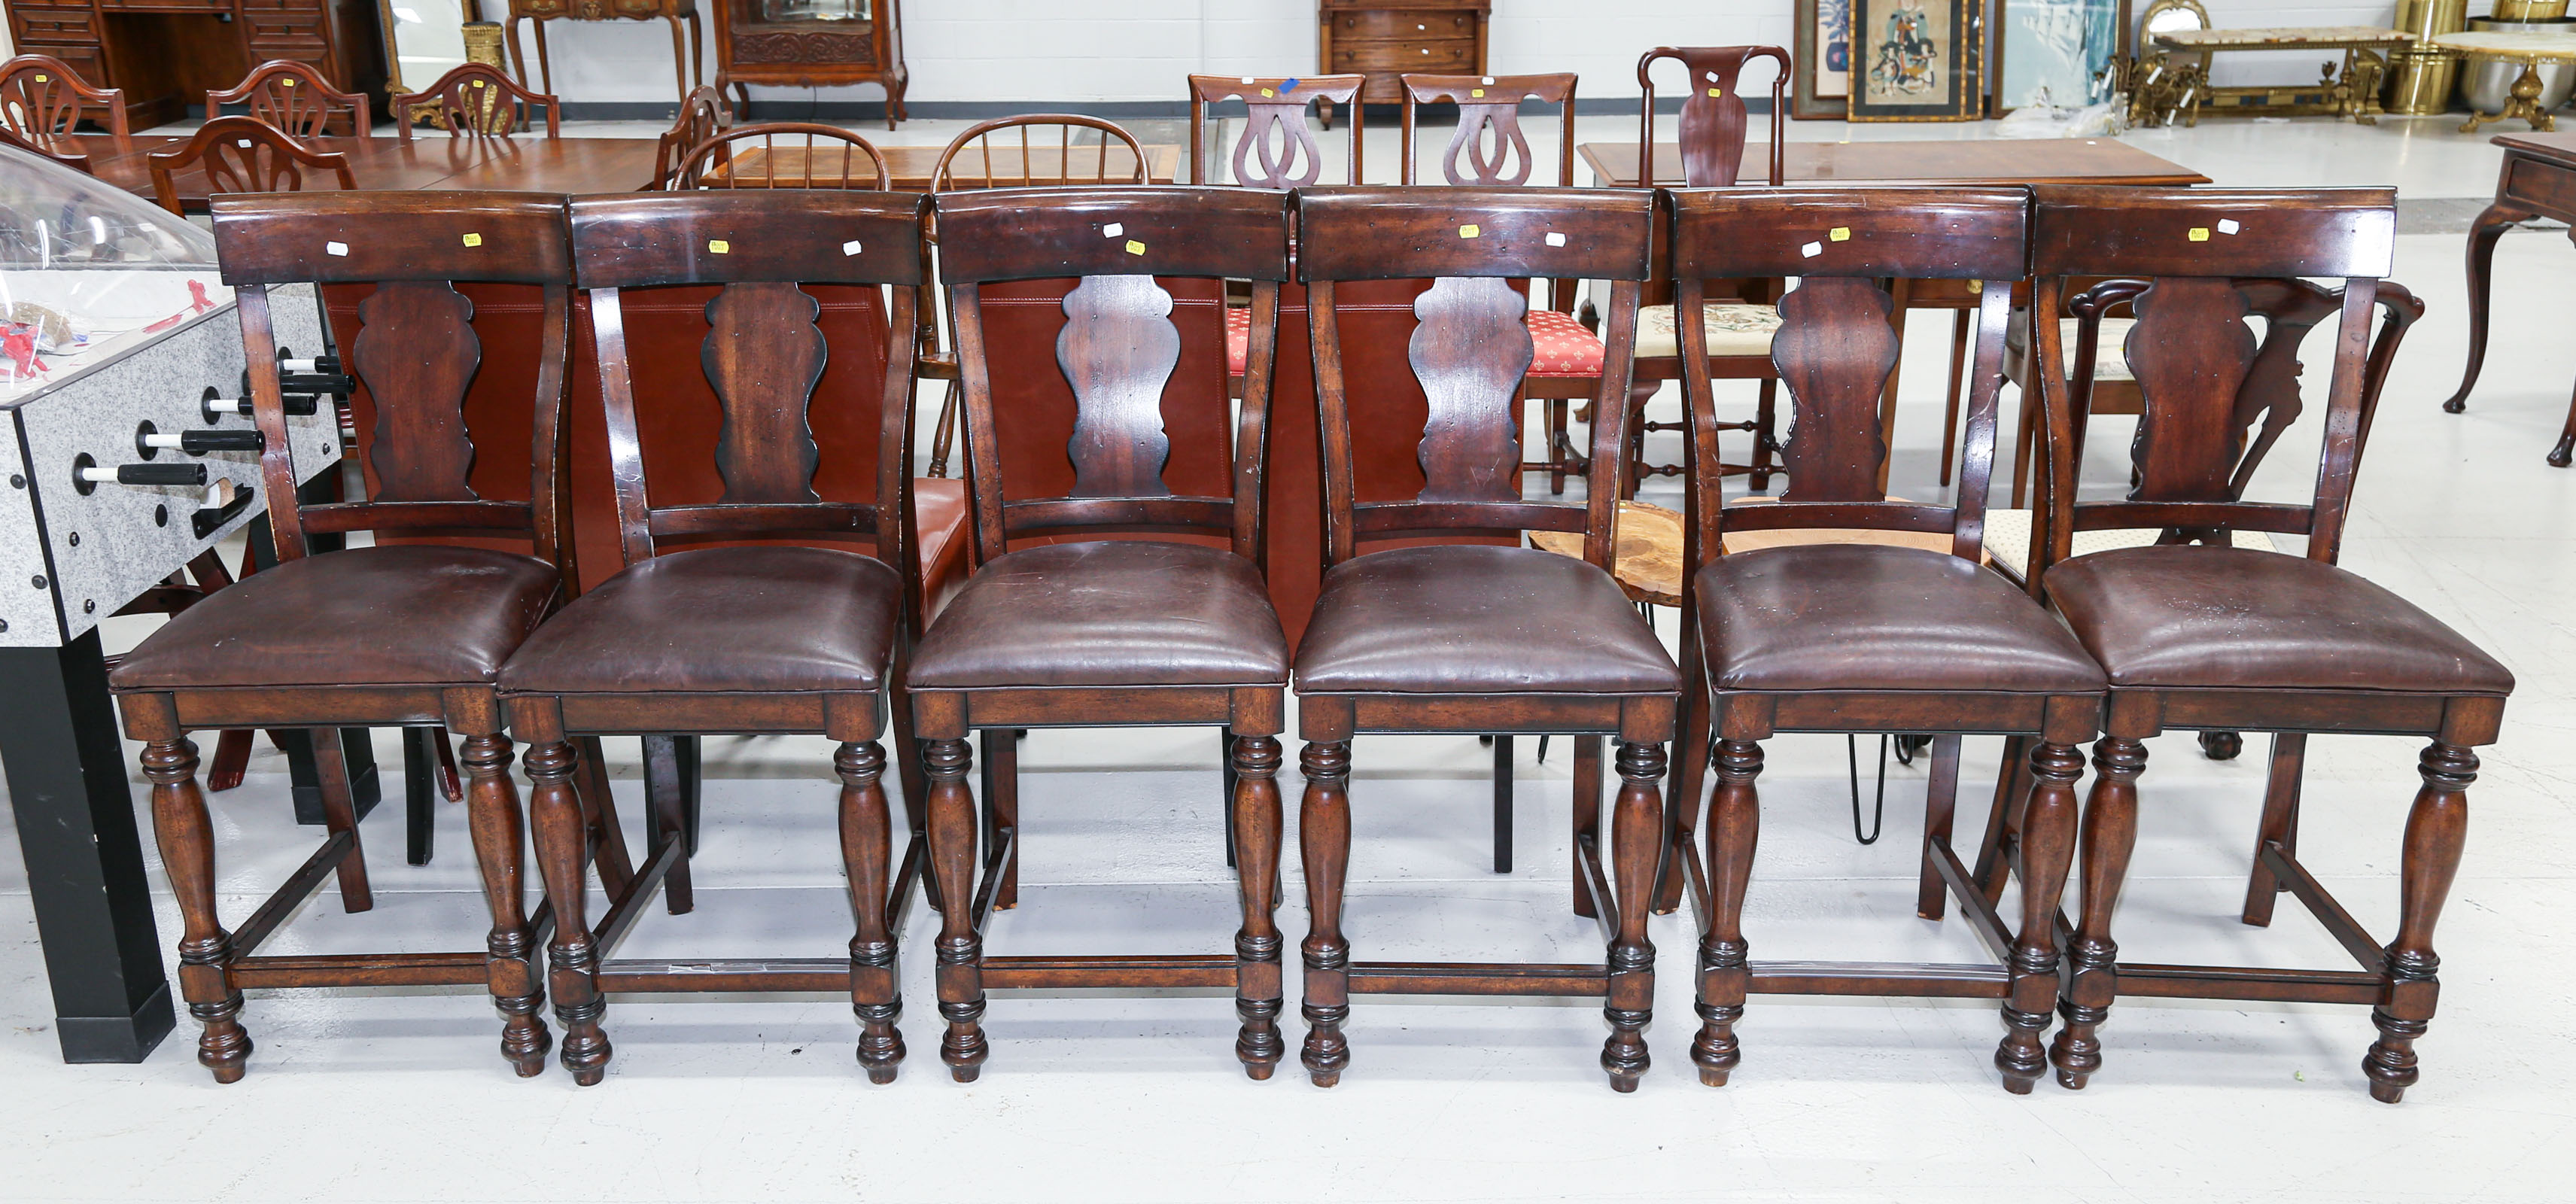 SIX BAR CHAIRS Approximately 42 36a38d